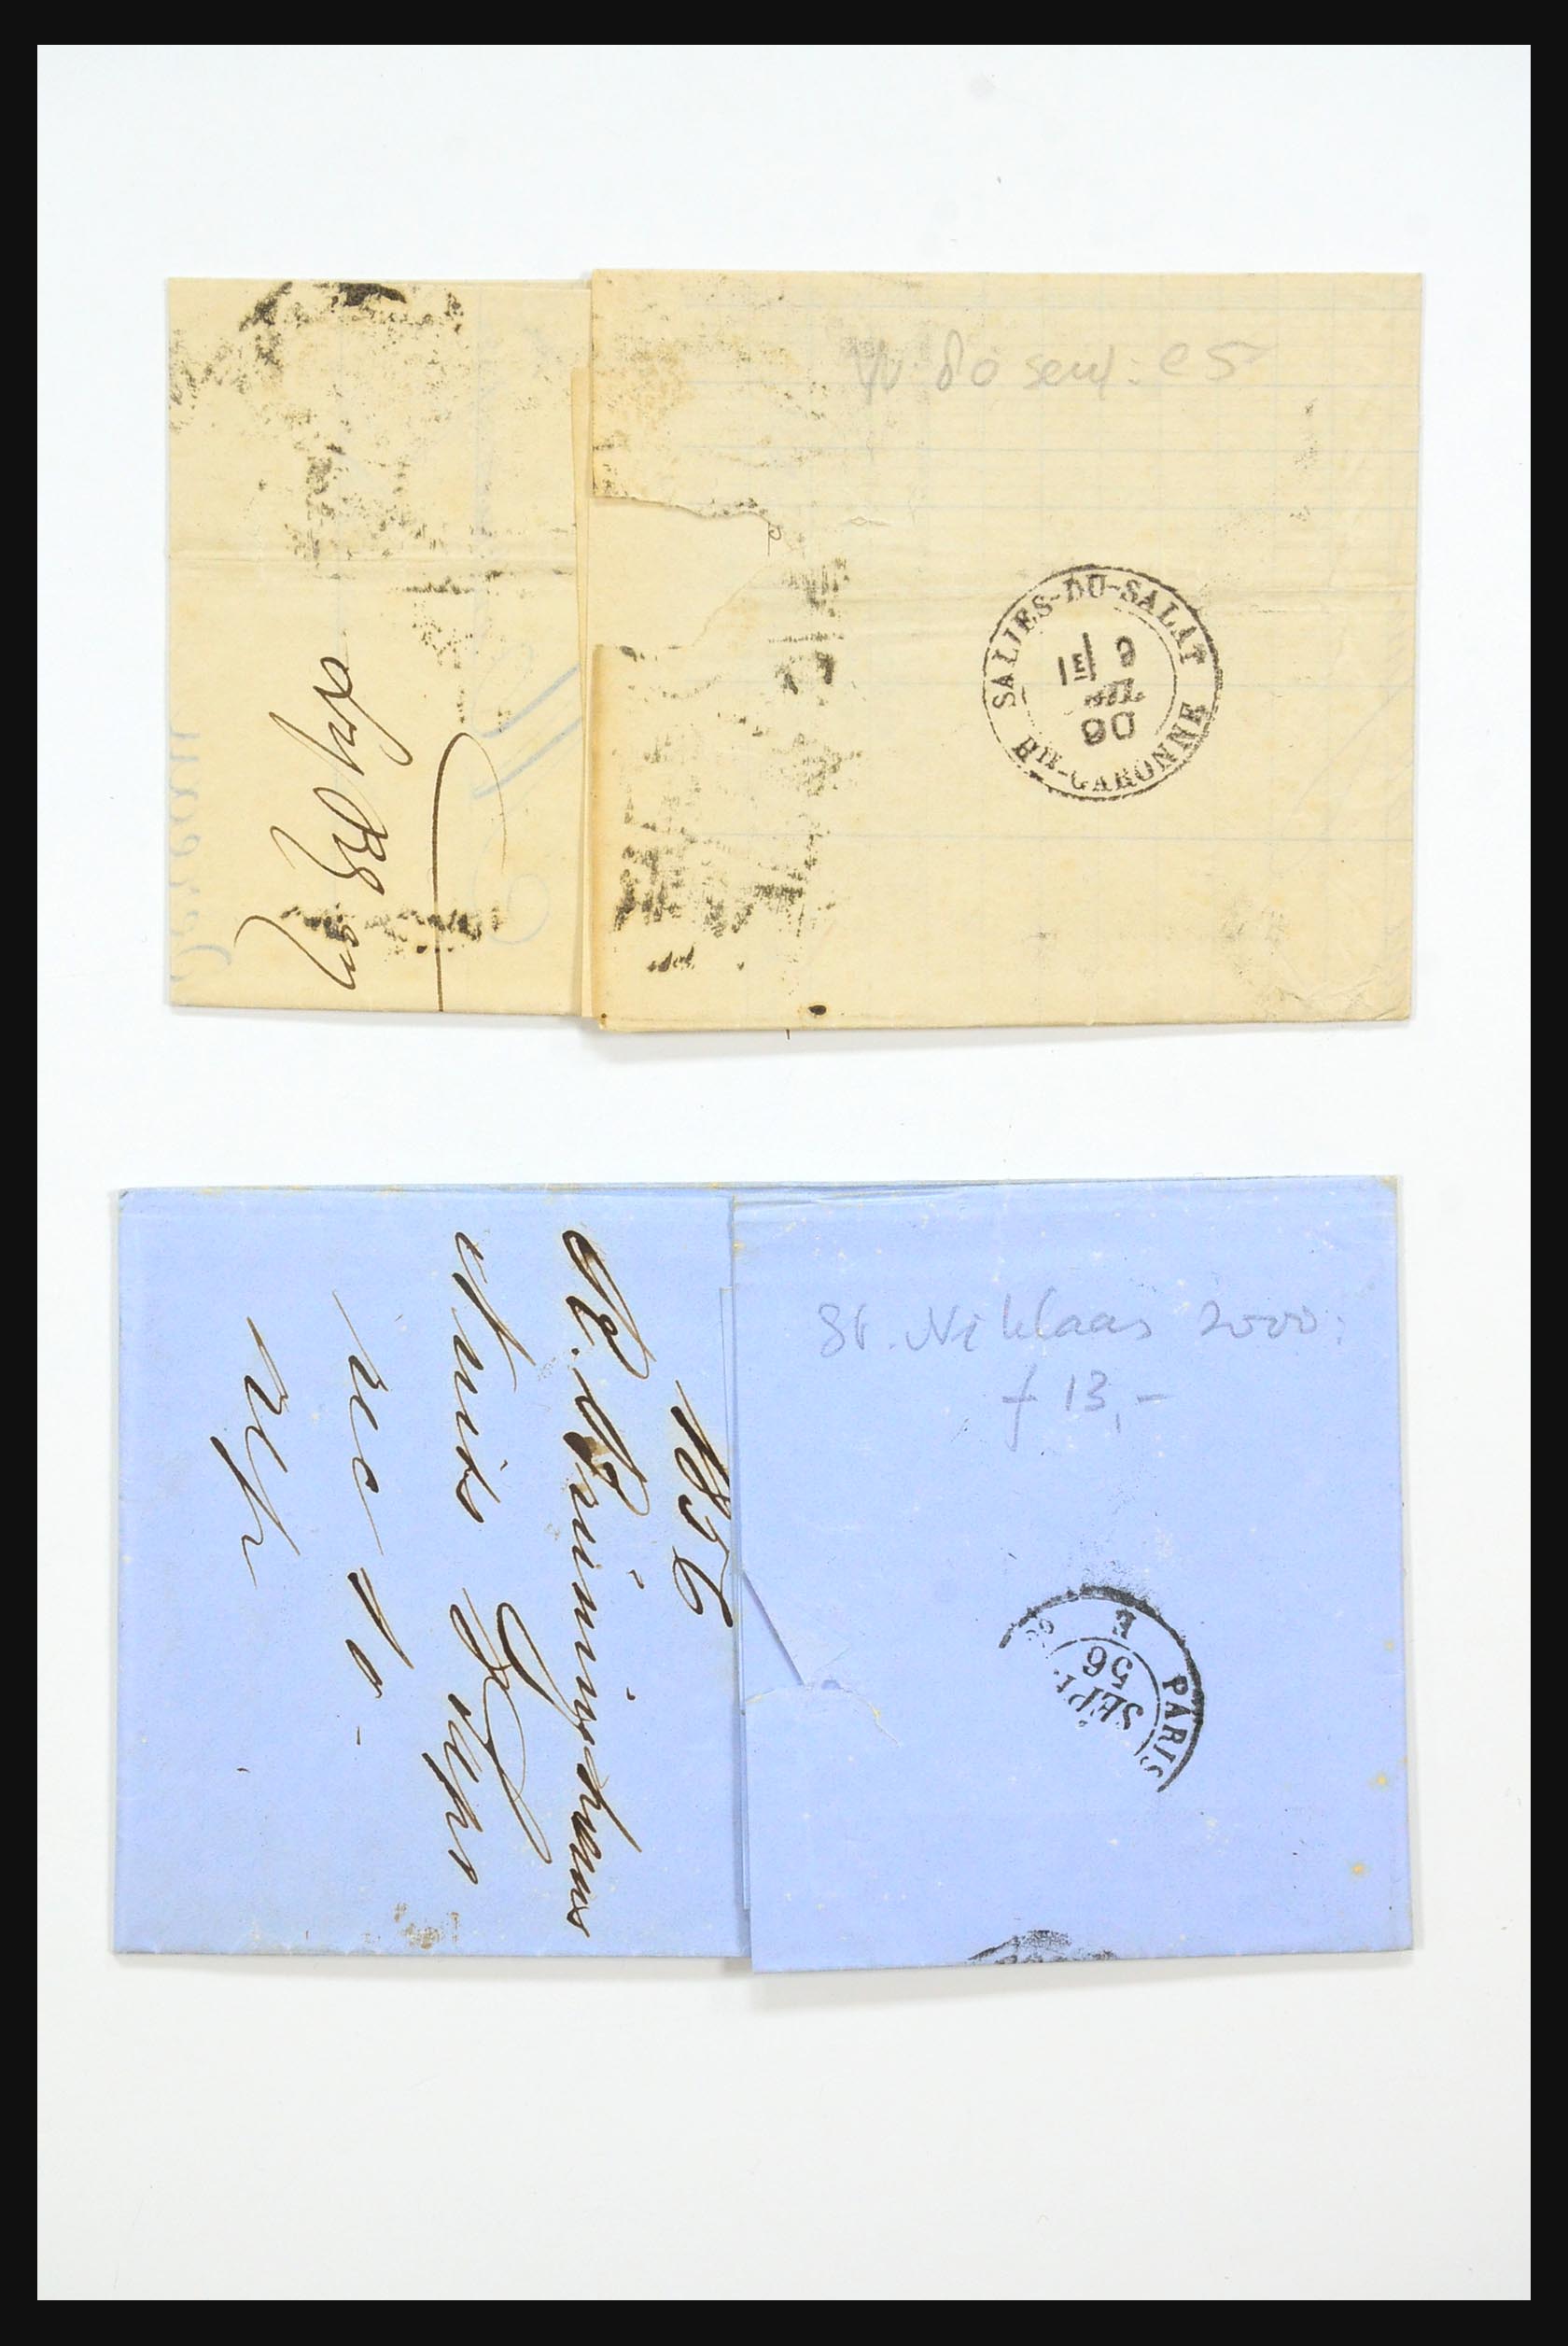 31359 0013 - 31359 France and Colonies covers 1770-1960.